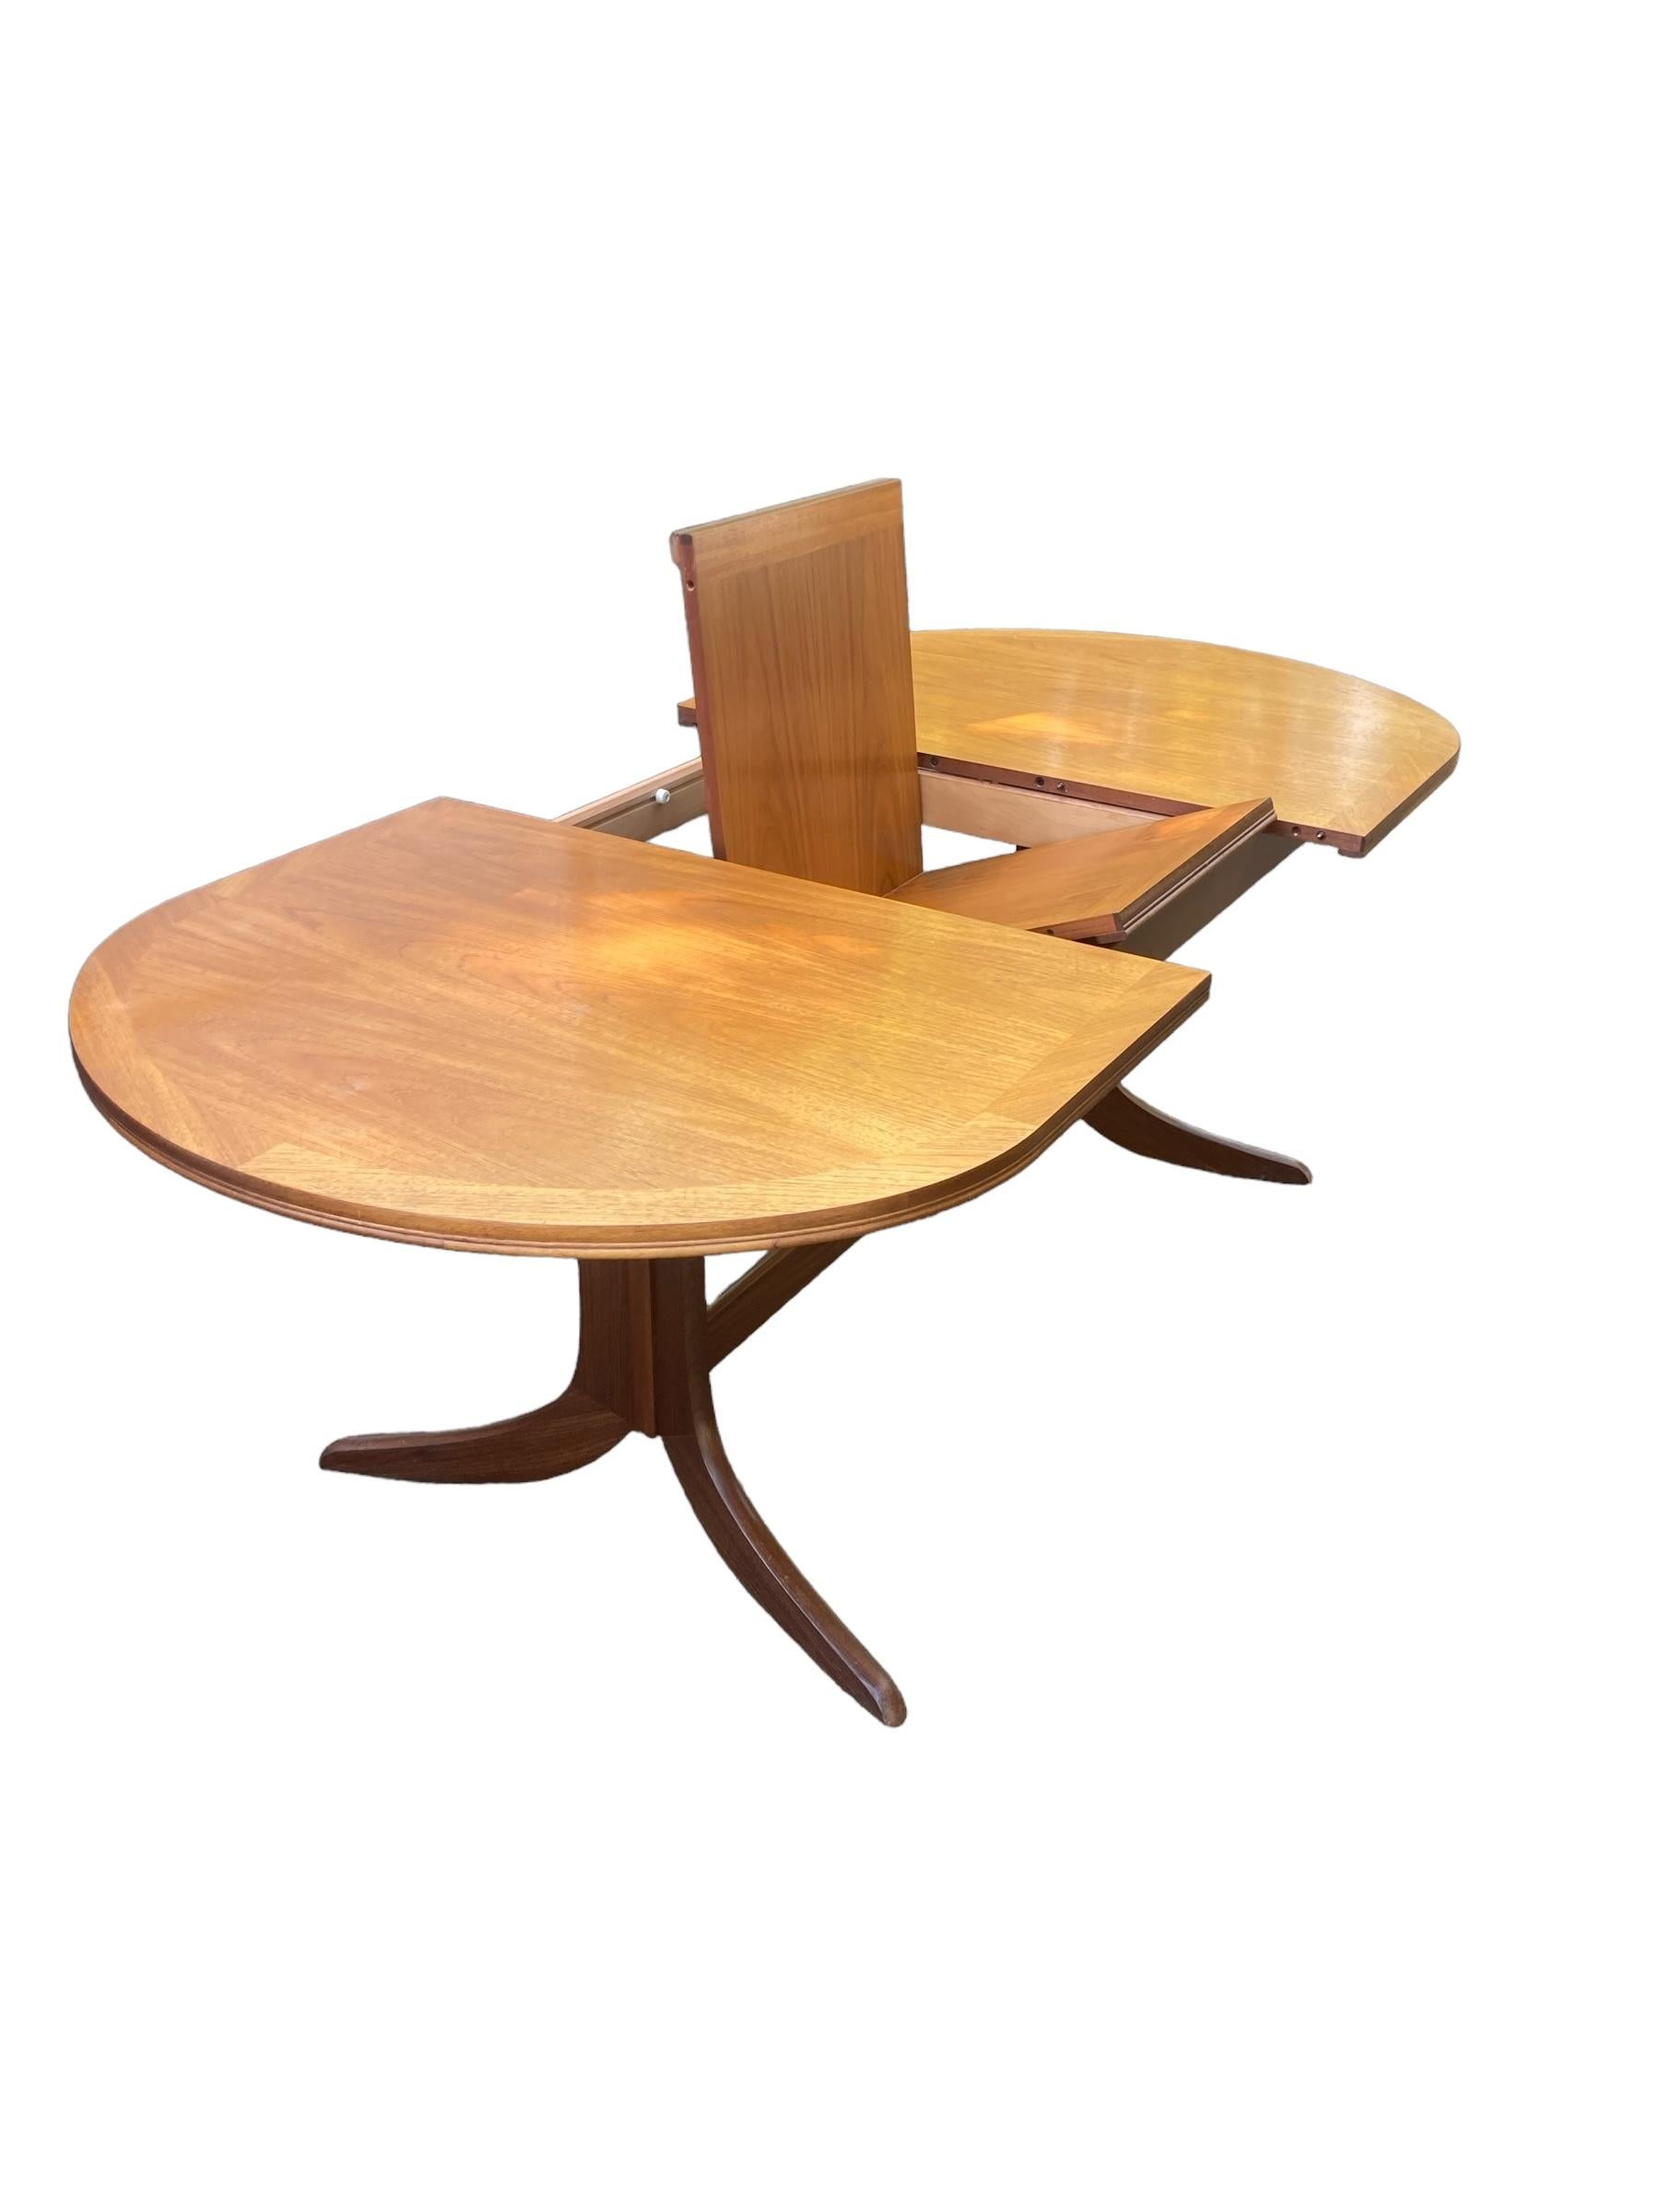 British Nathan Extendable Teak Mid Century Dining Table For Sale